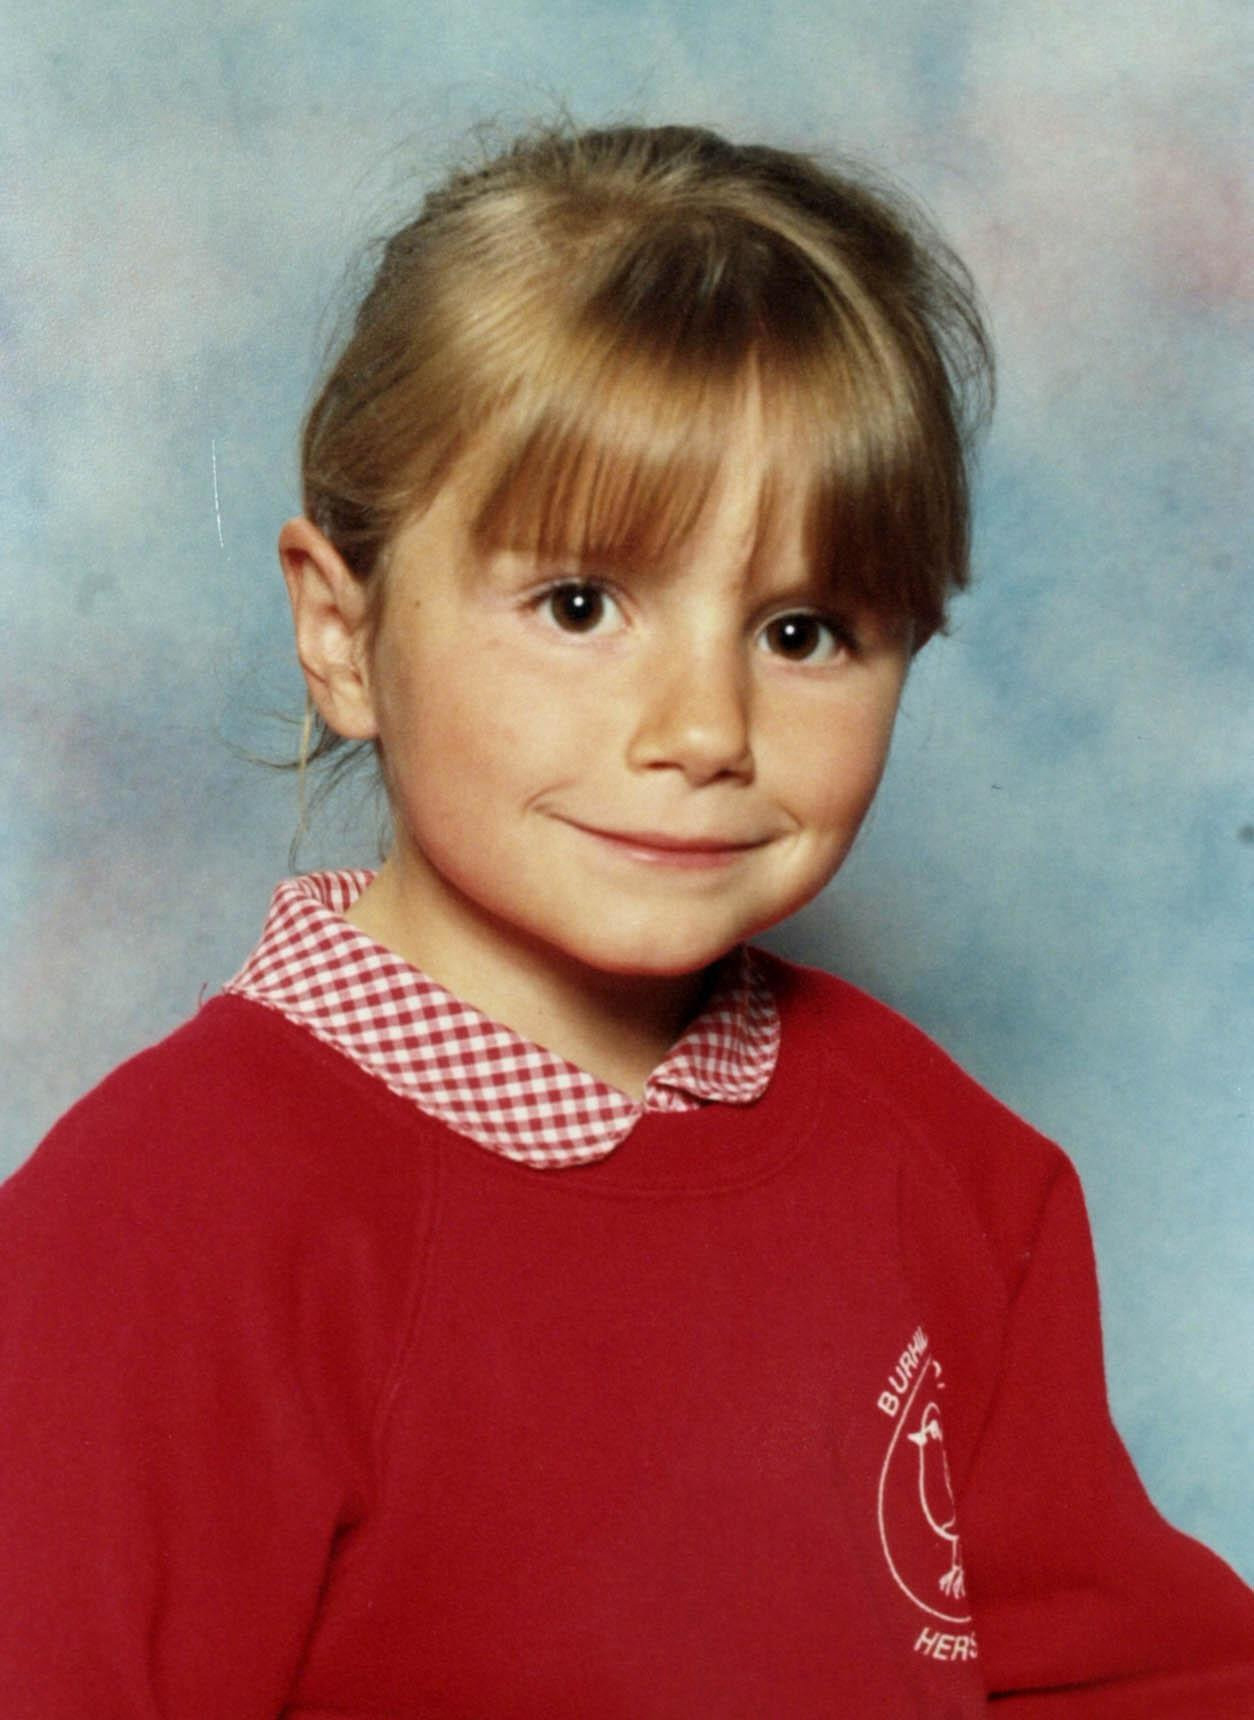 Sarah Payne was abducted and murdered in 2000